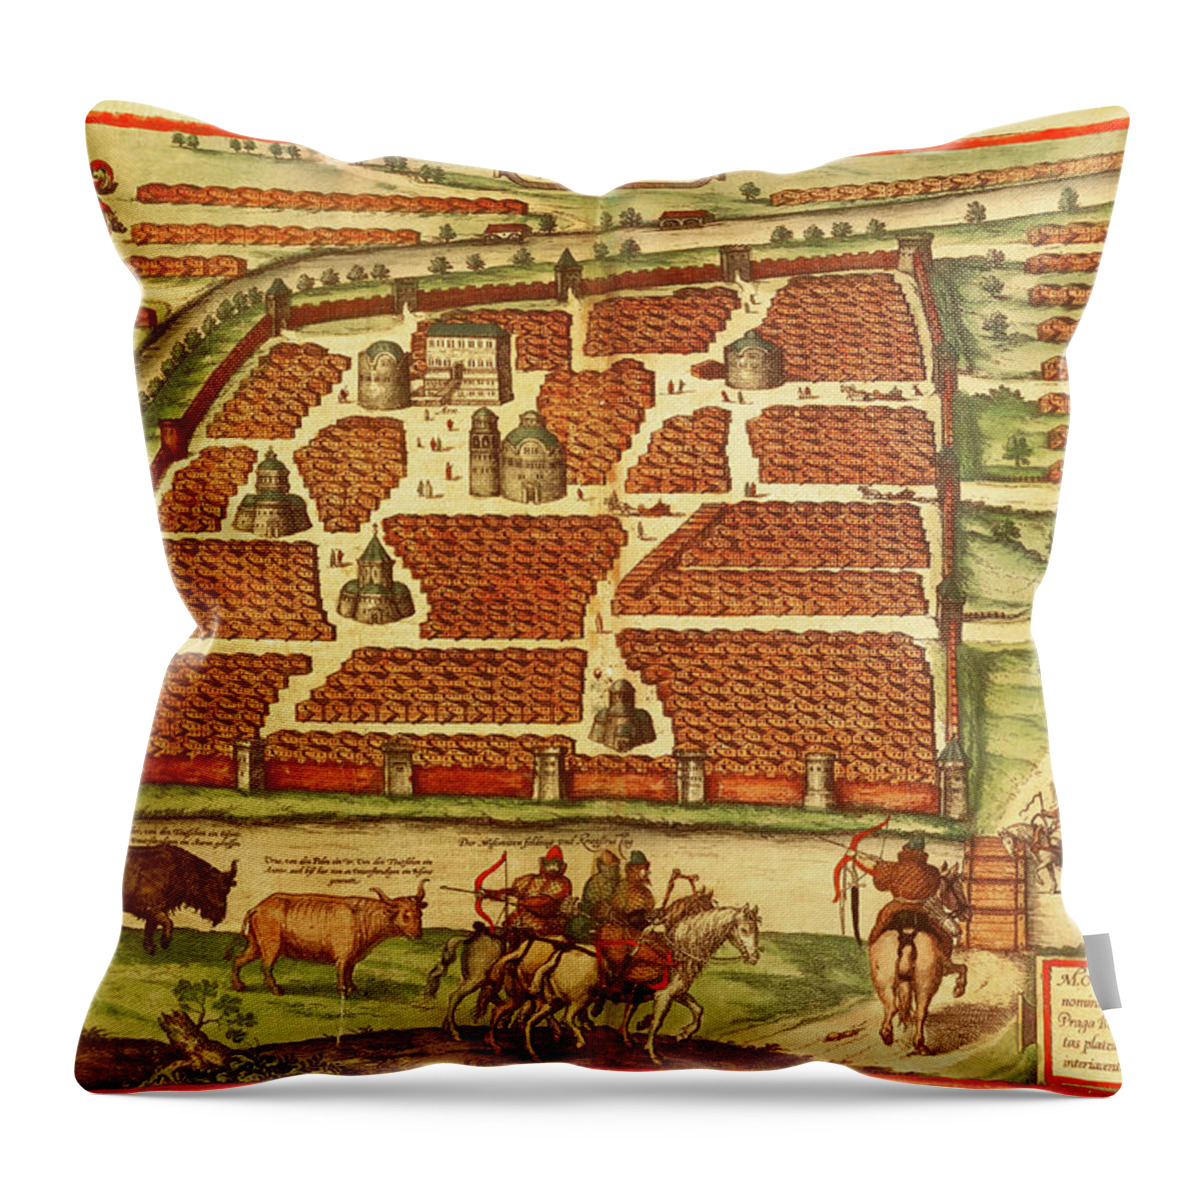 City Throw Pillow featuring the drawing Moscow Moskva Russia by Braun Hogenberg